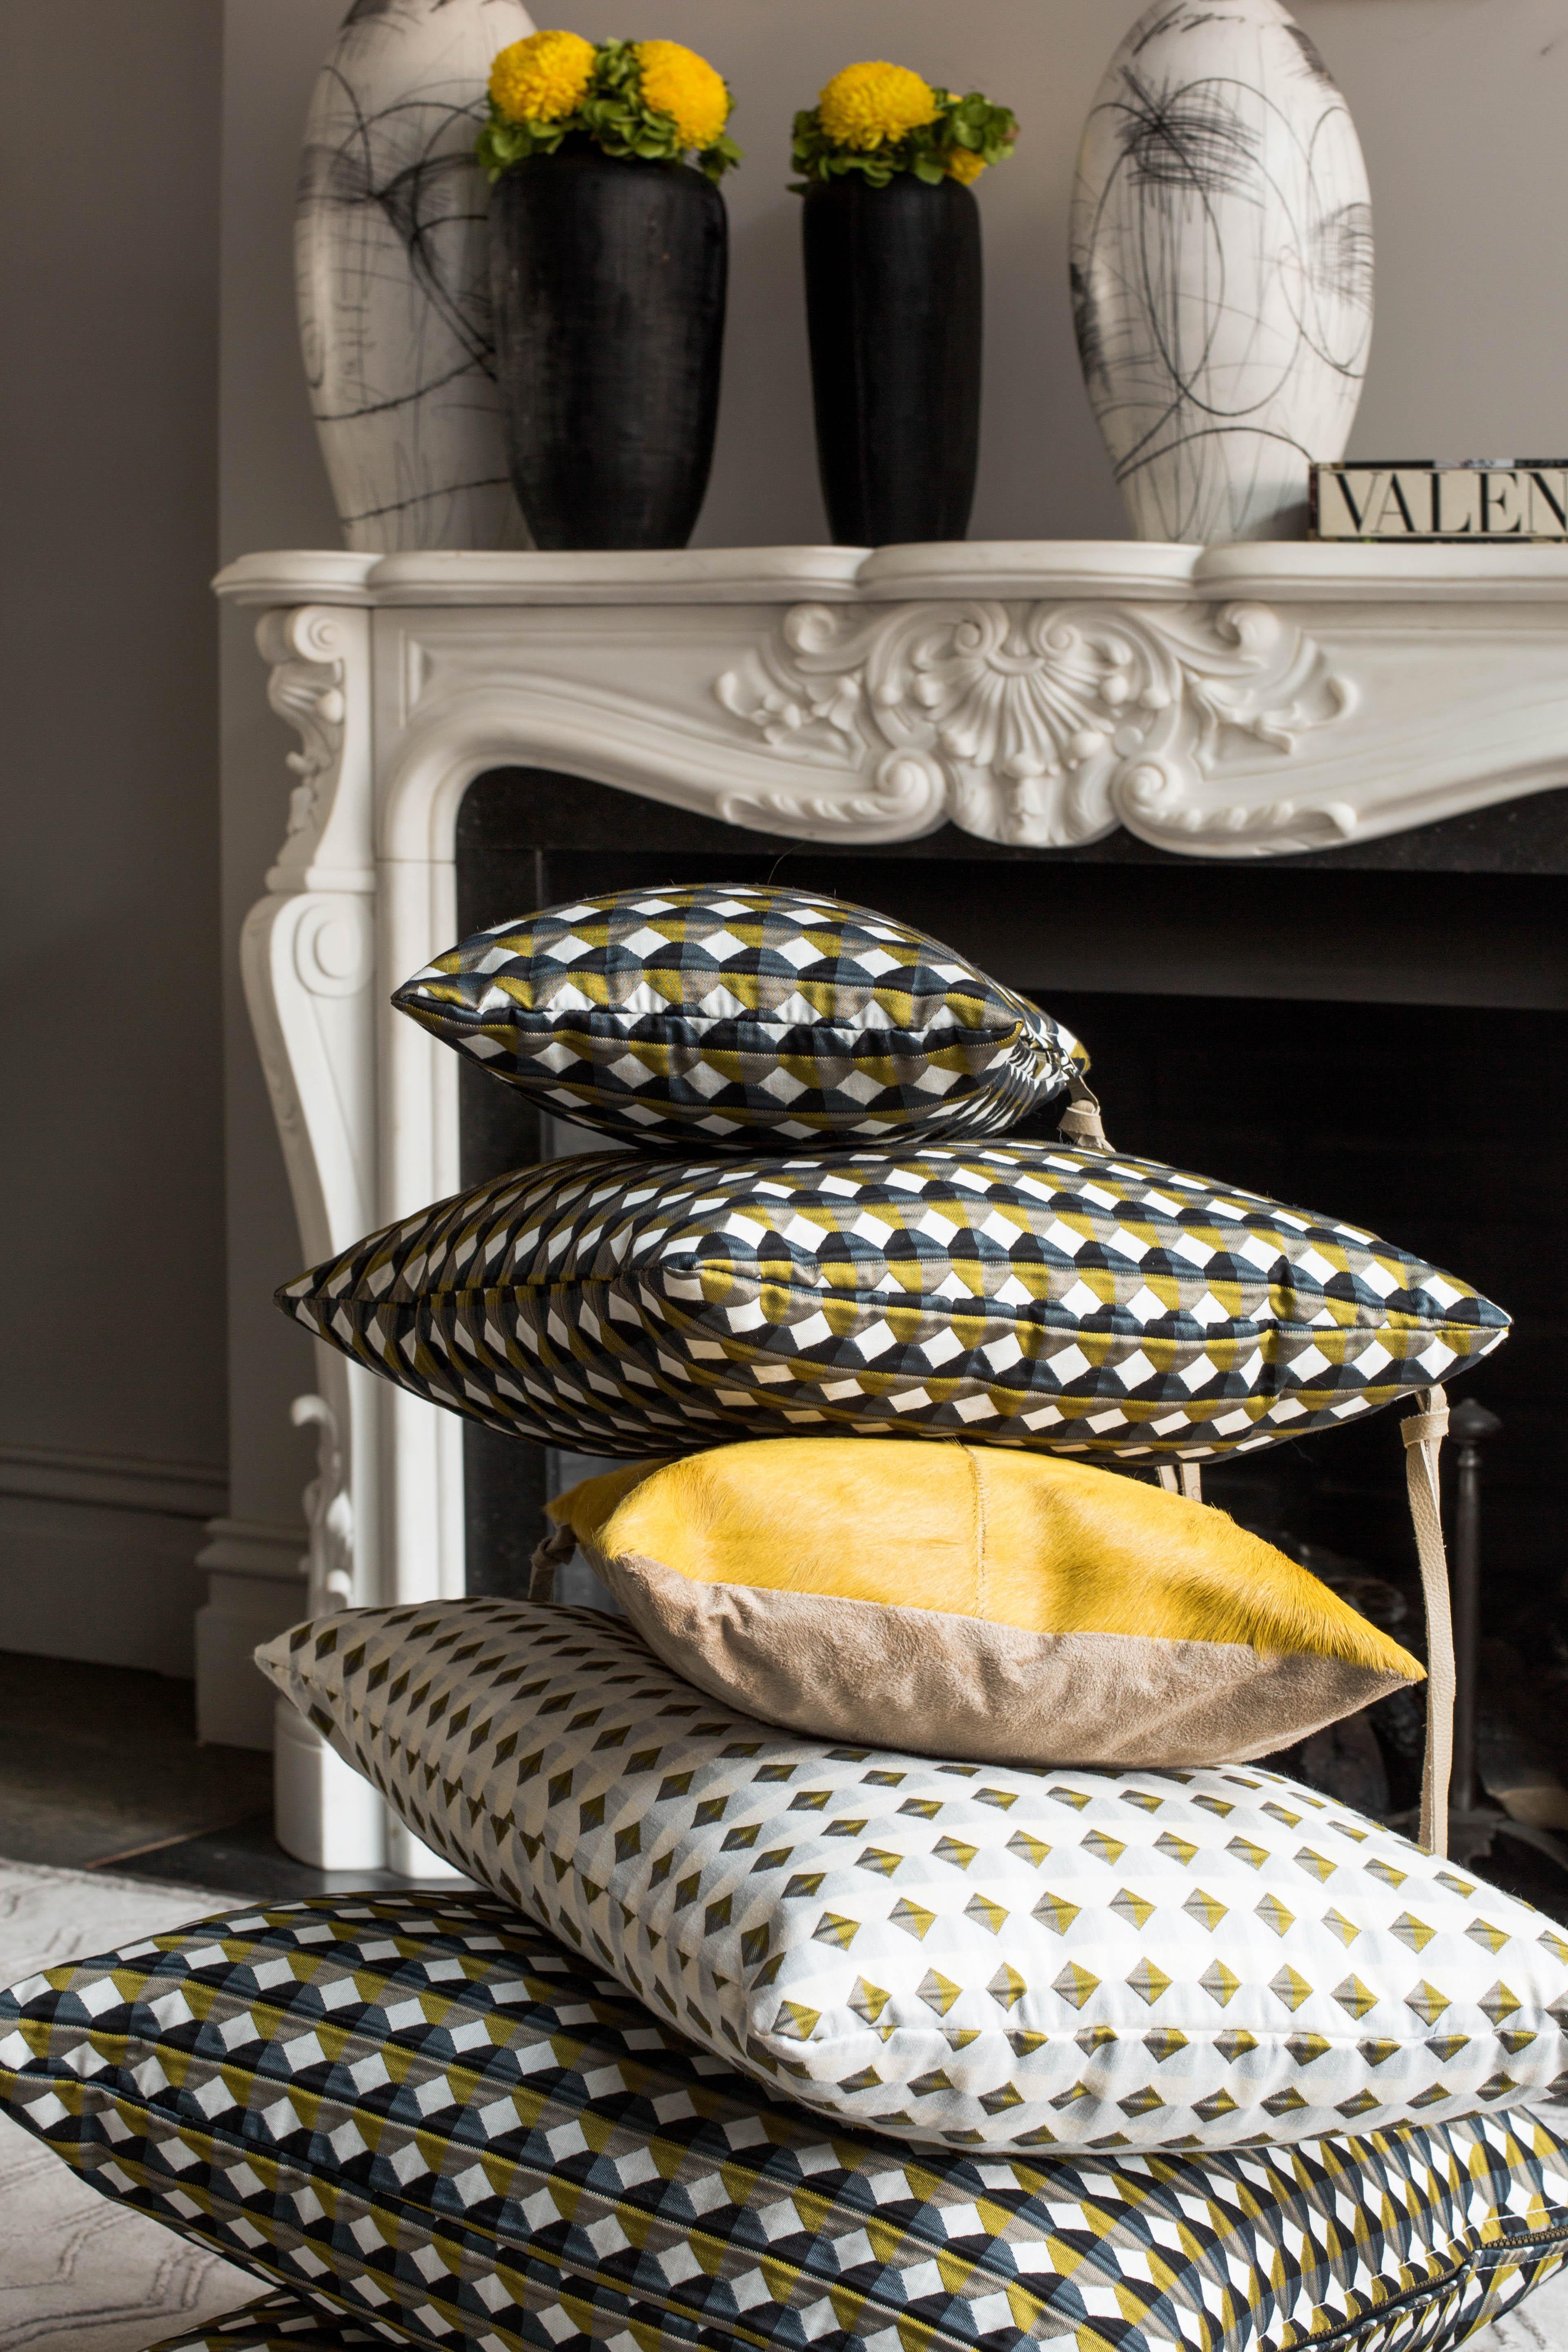 Cushions are just as much of an interior accessory as they are a convenient place to rest your head. Casa Botelho’s range of bespoke cushions are completely customizable for each and every application, from size and shape to colour and texture. Each